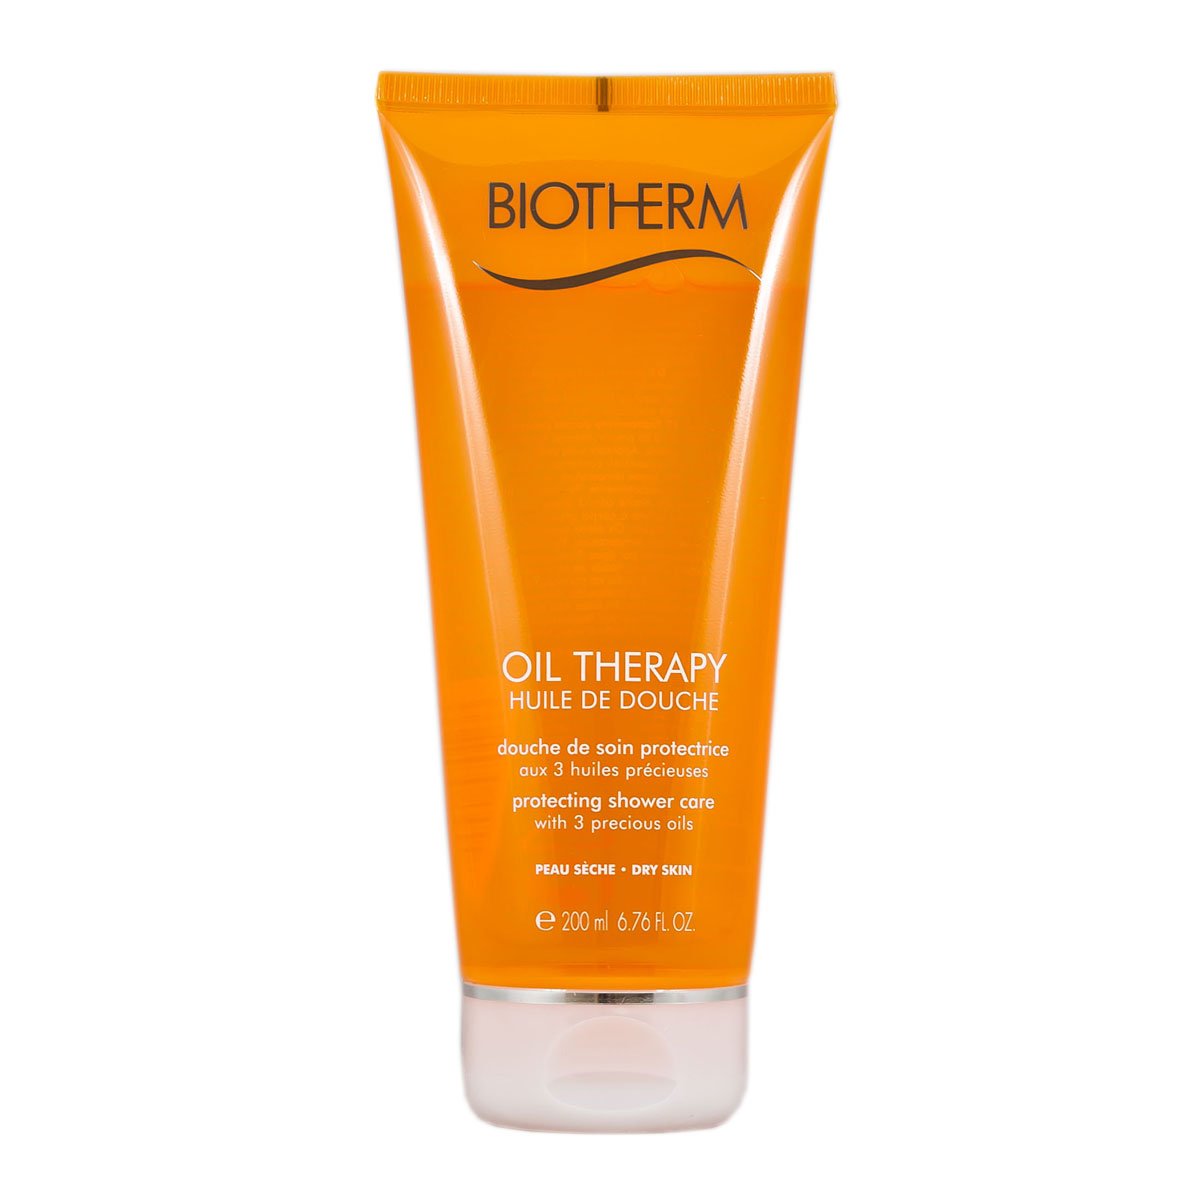 Biotherm Oil Therapy Huile De Douche Woman Protection Shower Care, 200 g